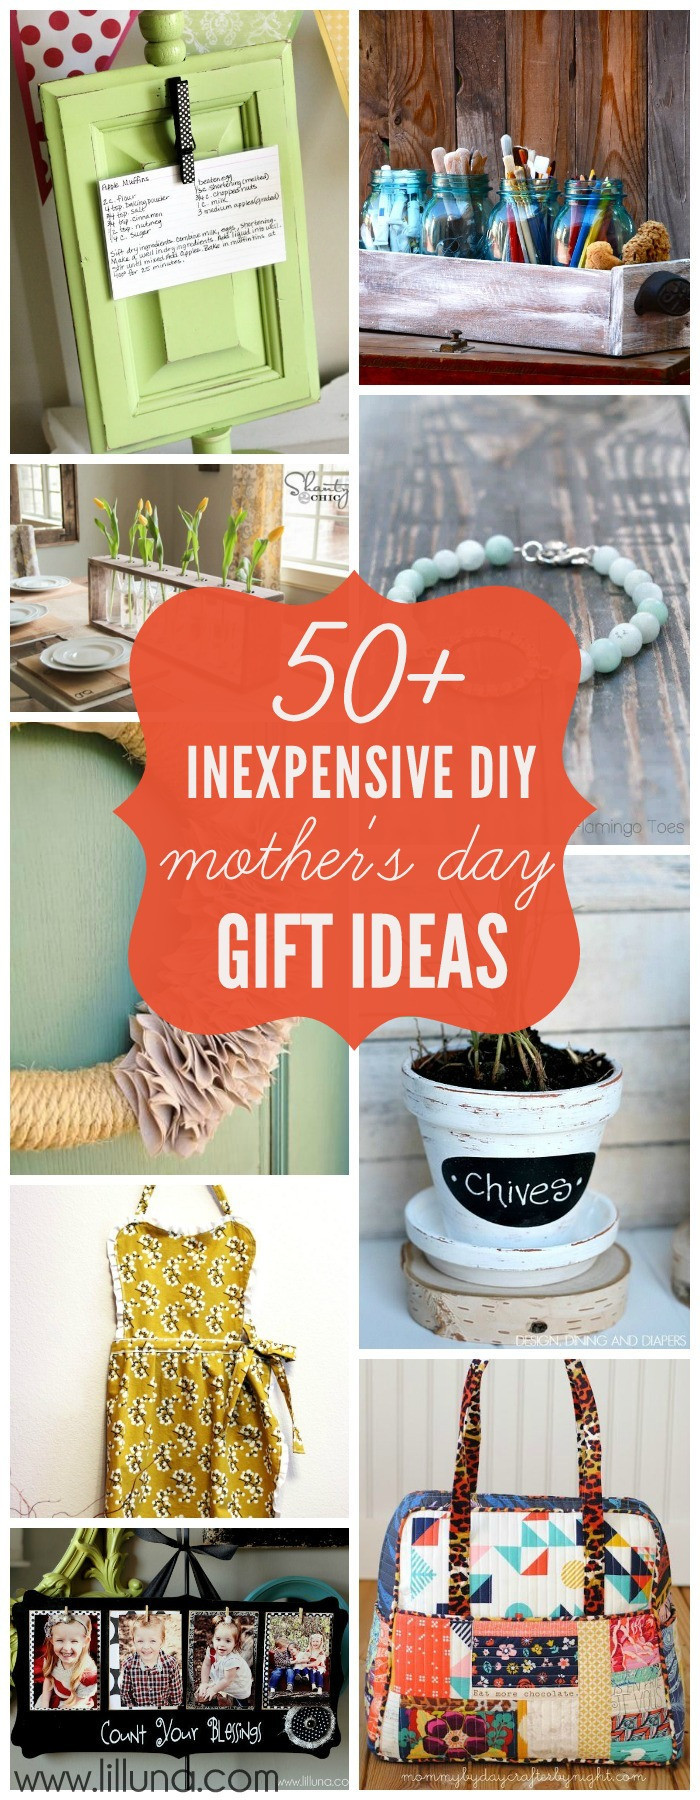 Reddit Mother'S Day Gift Ideas
 The top 21 Ideas About Diy Mother s Day Gift Ideas Best